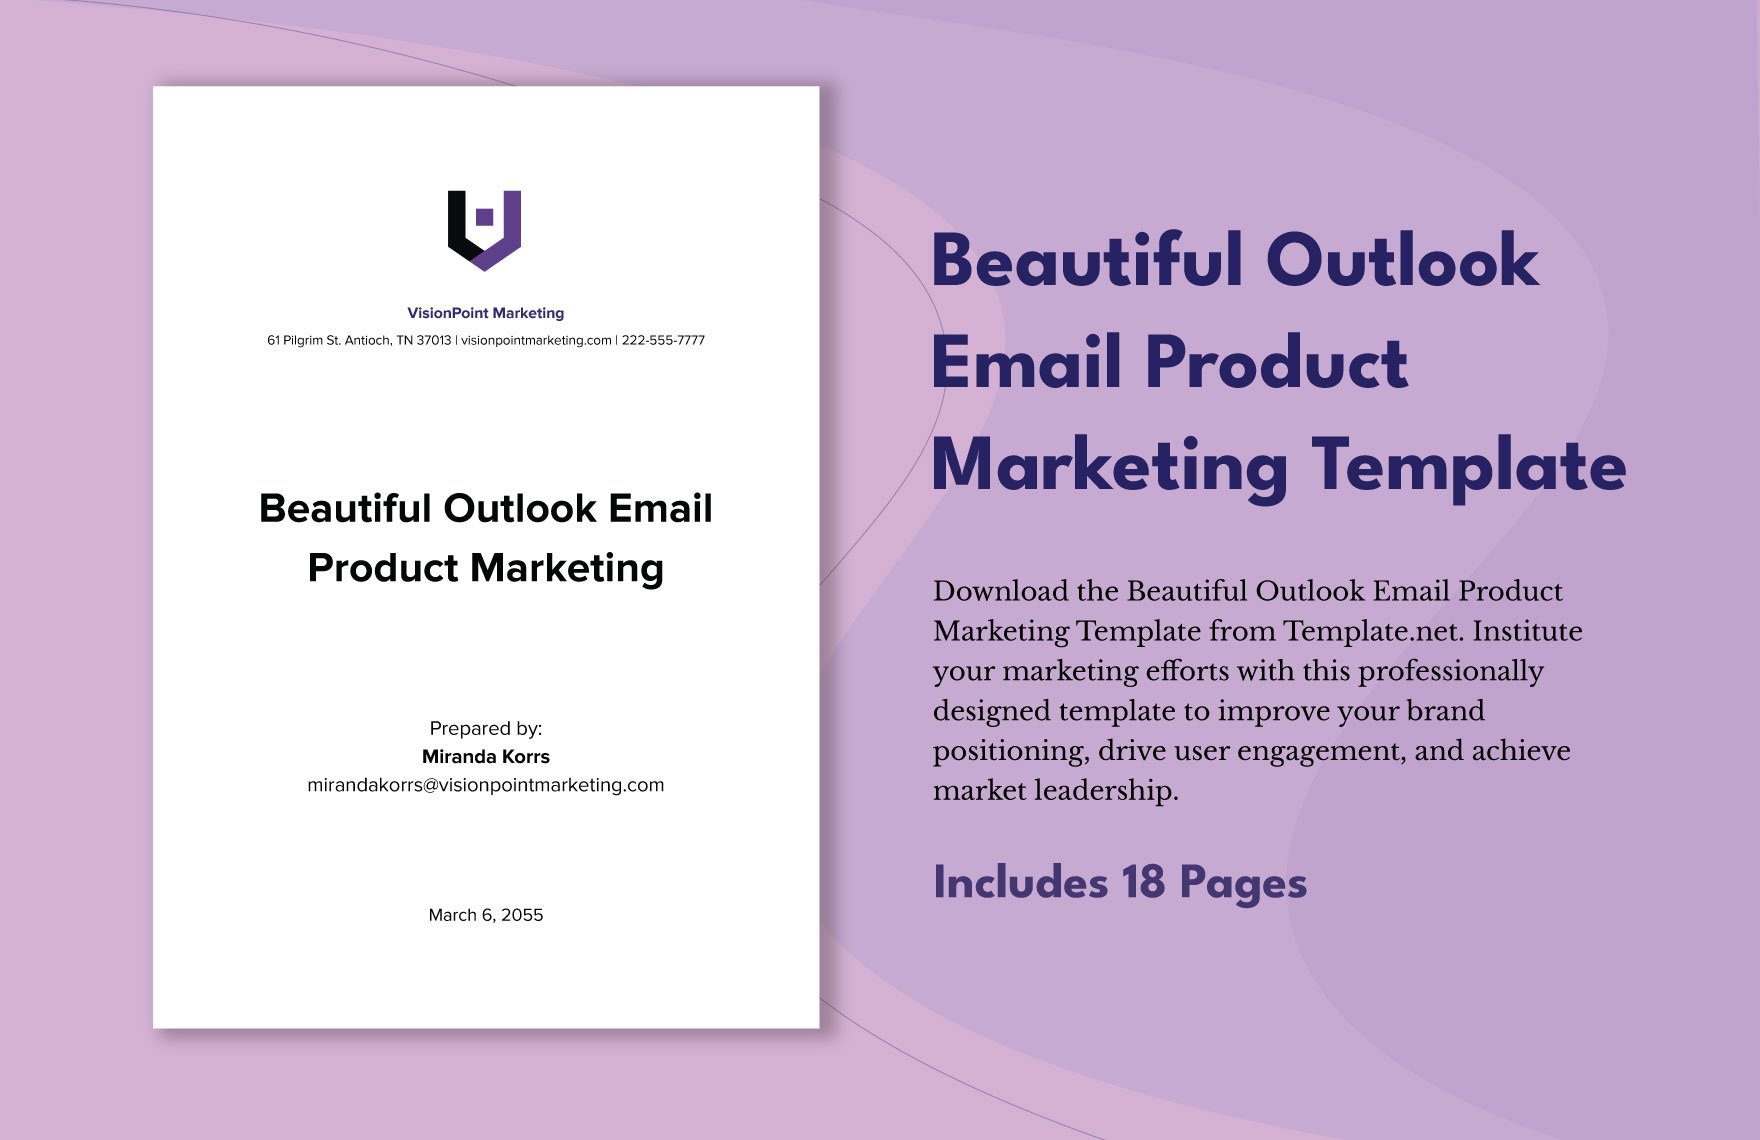 beautiful-outlook-email-product-marketing